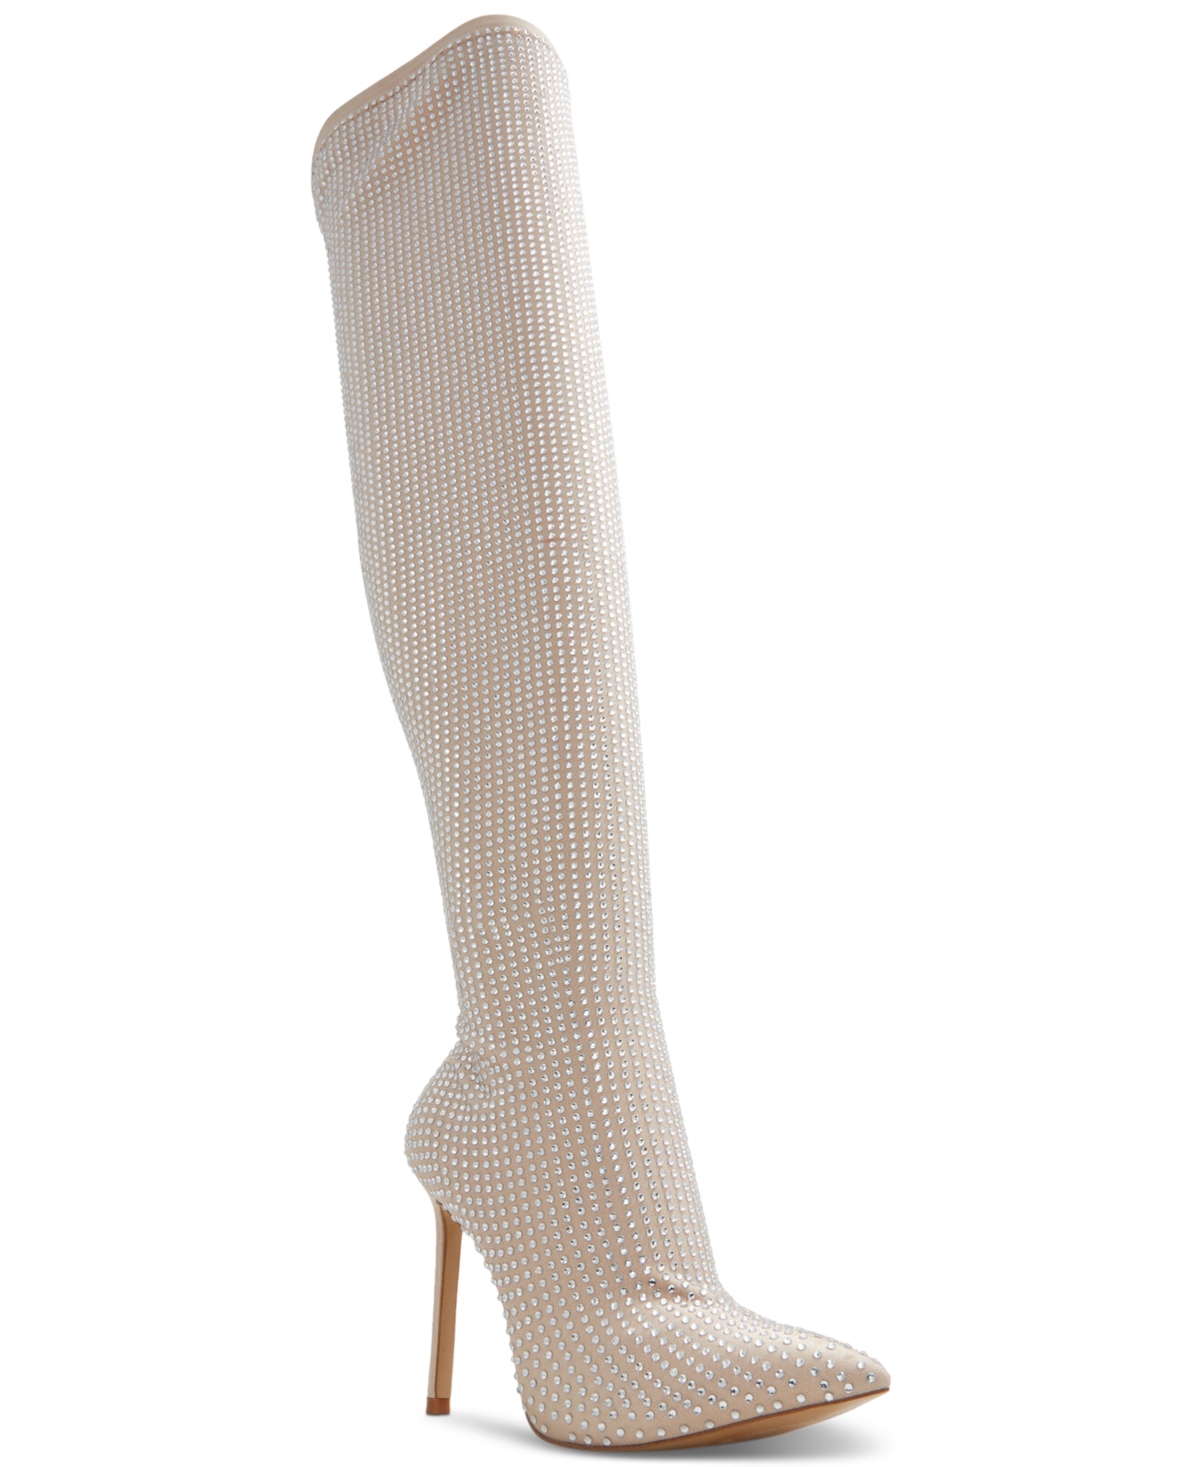 Nassia Over-The-Knee Pull-On Dress Boots - Bone